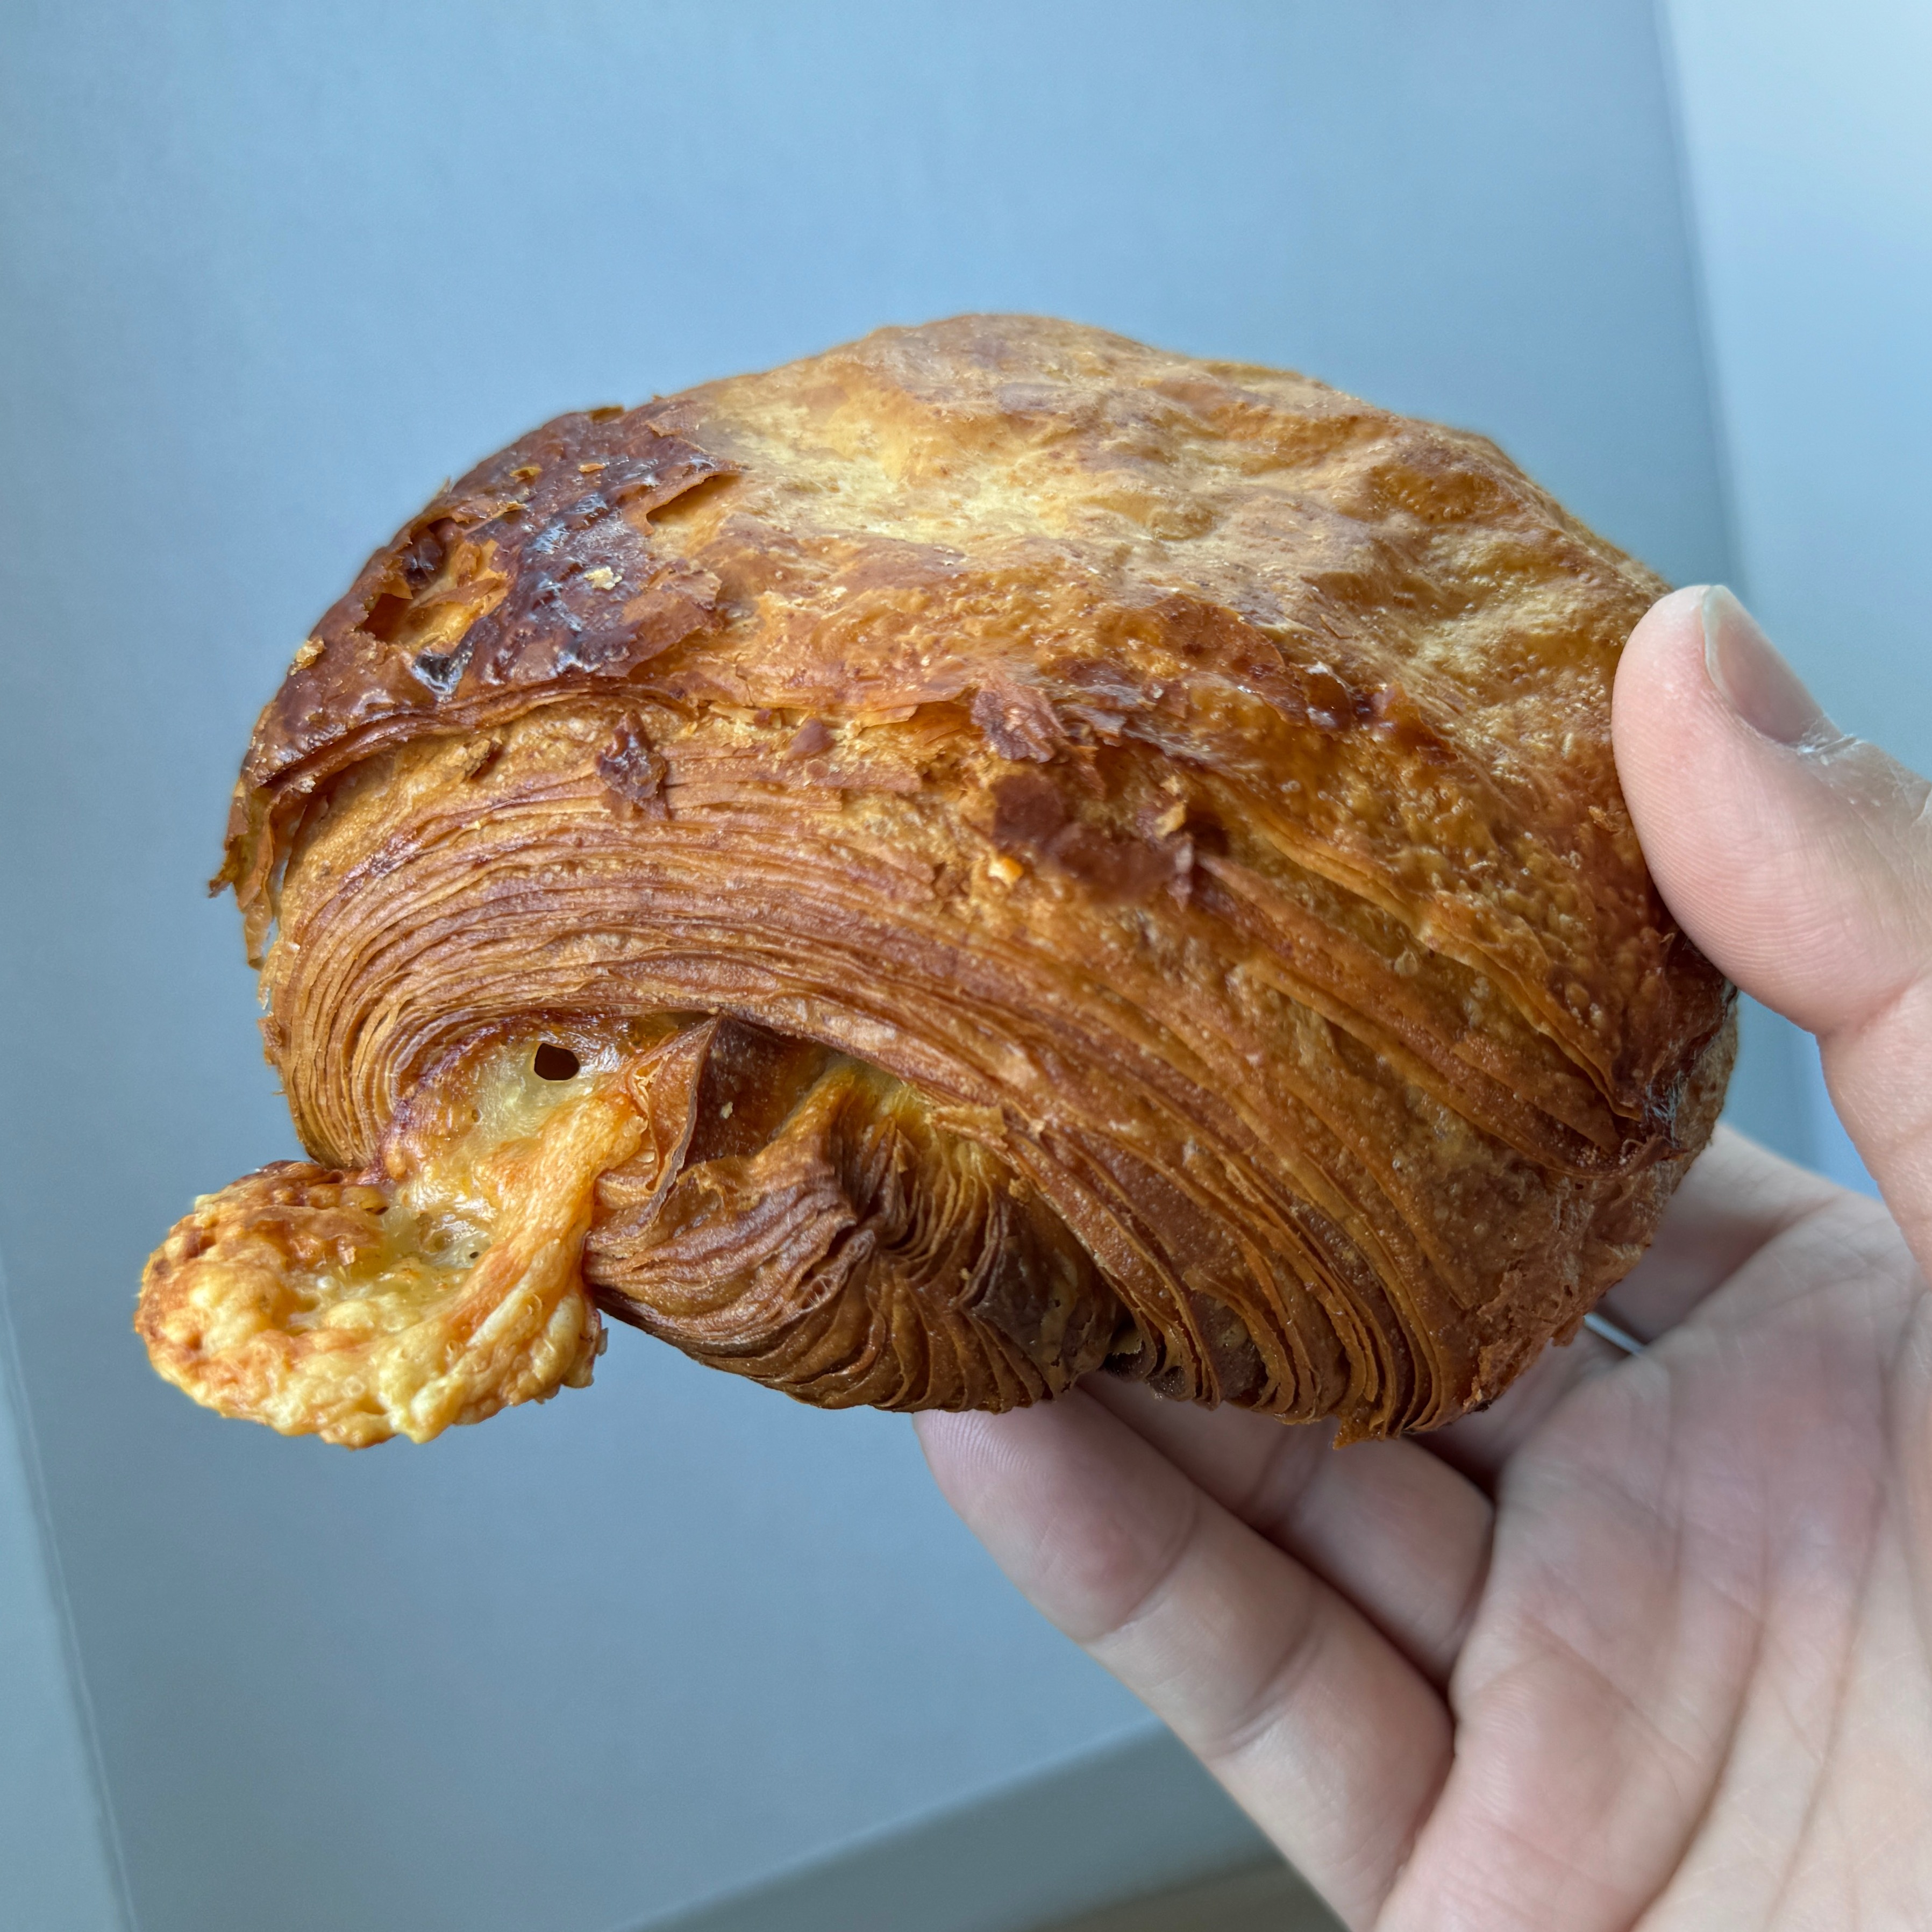 Ham & Cheese Croissant from Friends & Family on #foodmento http://foodmento.com/dish/51901